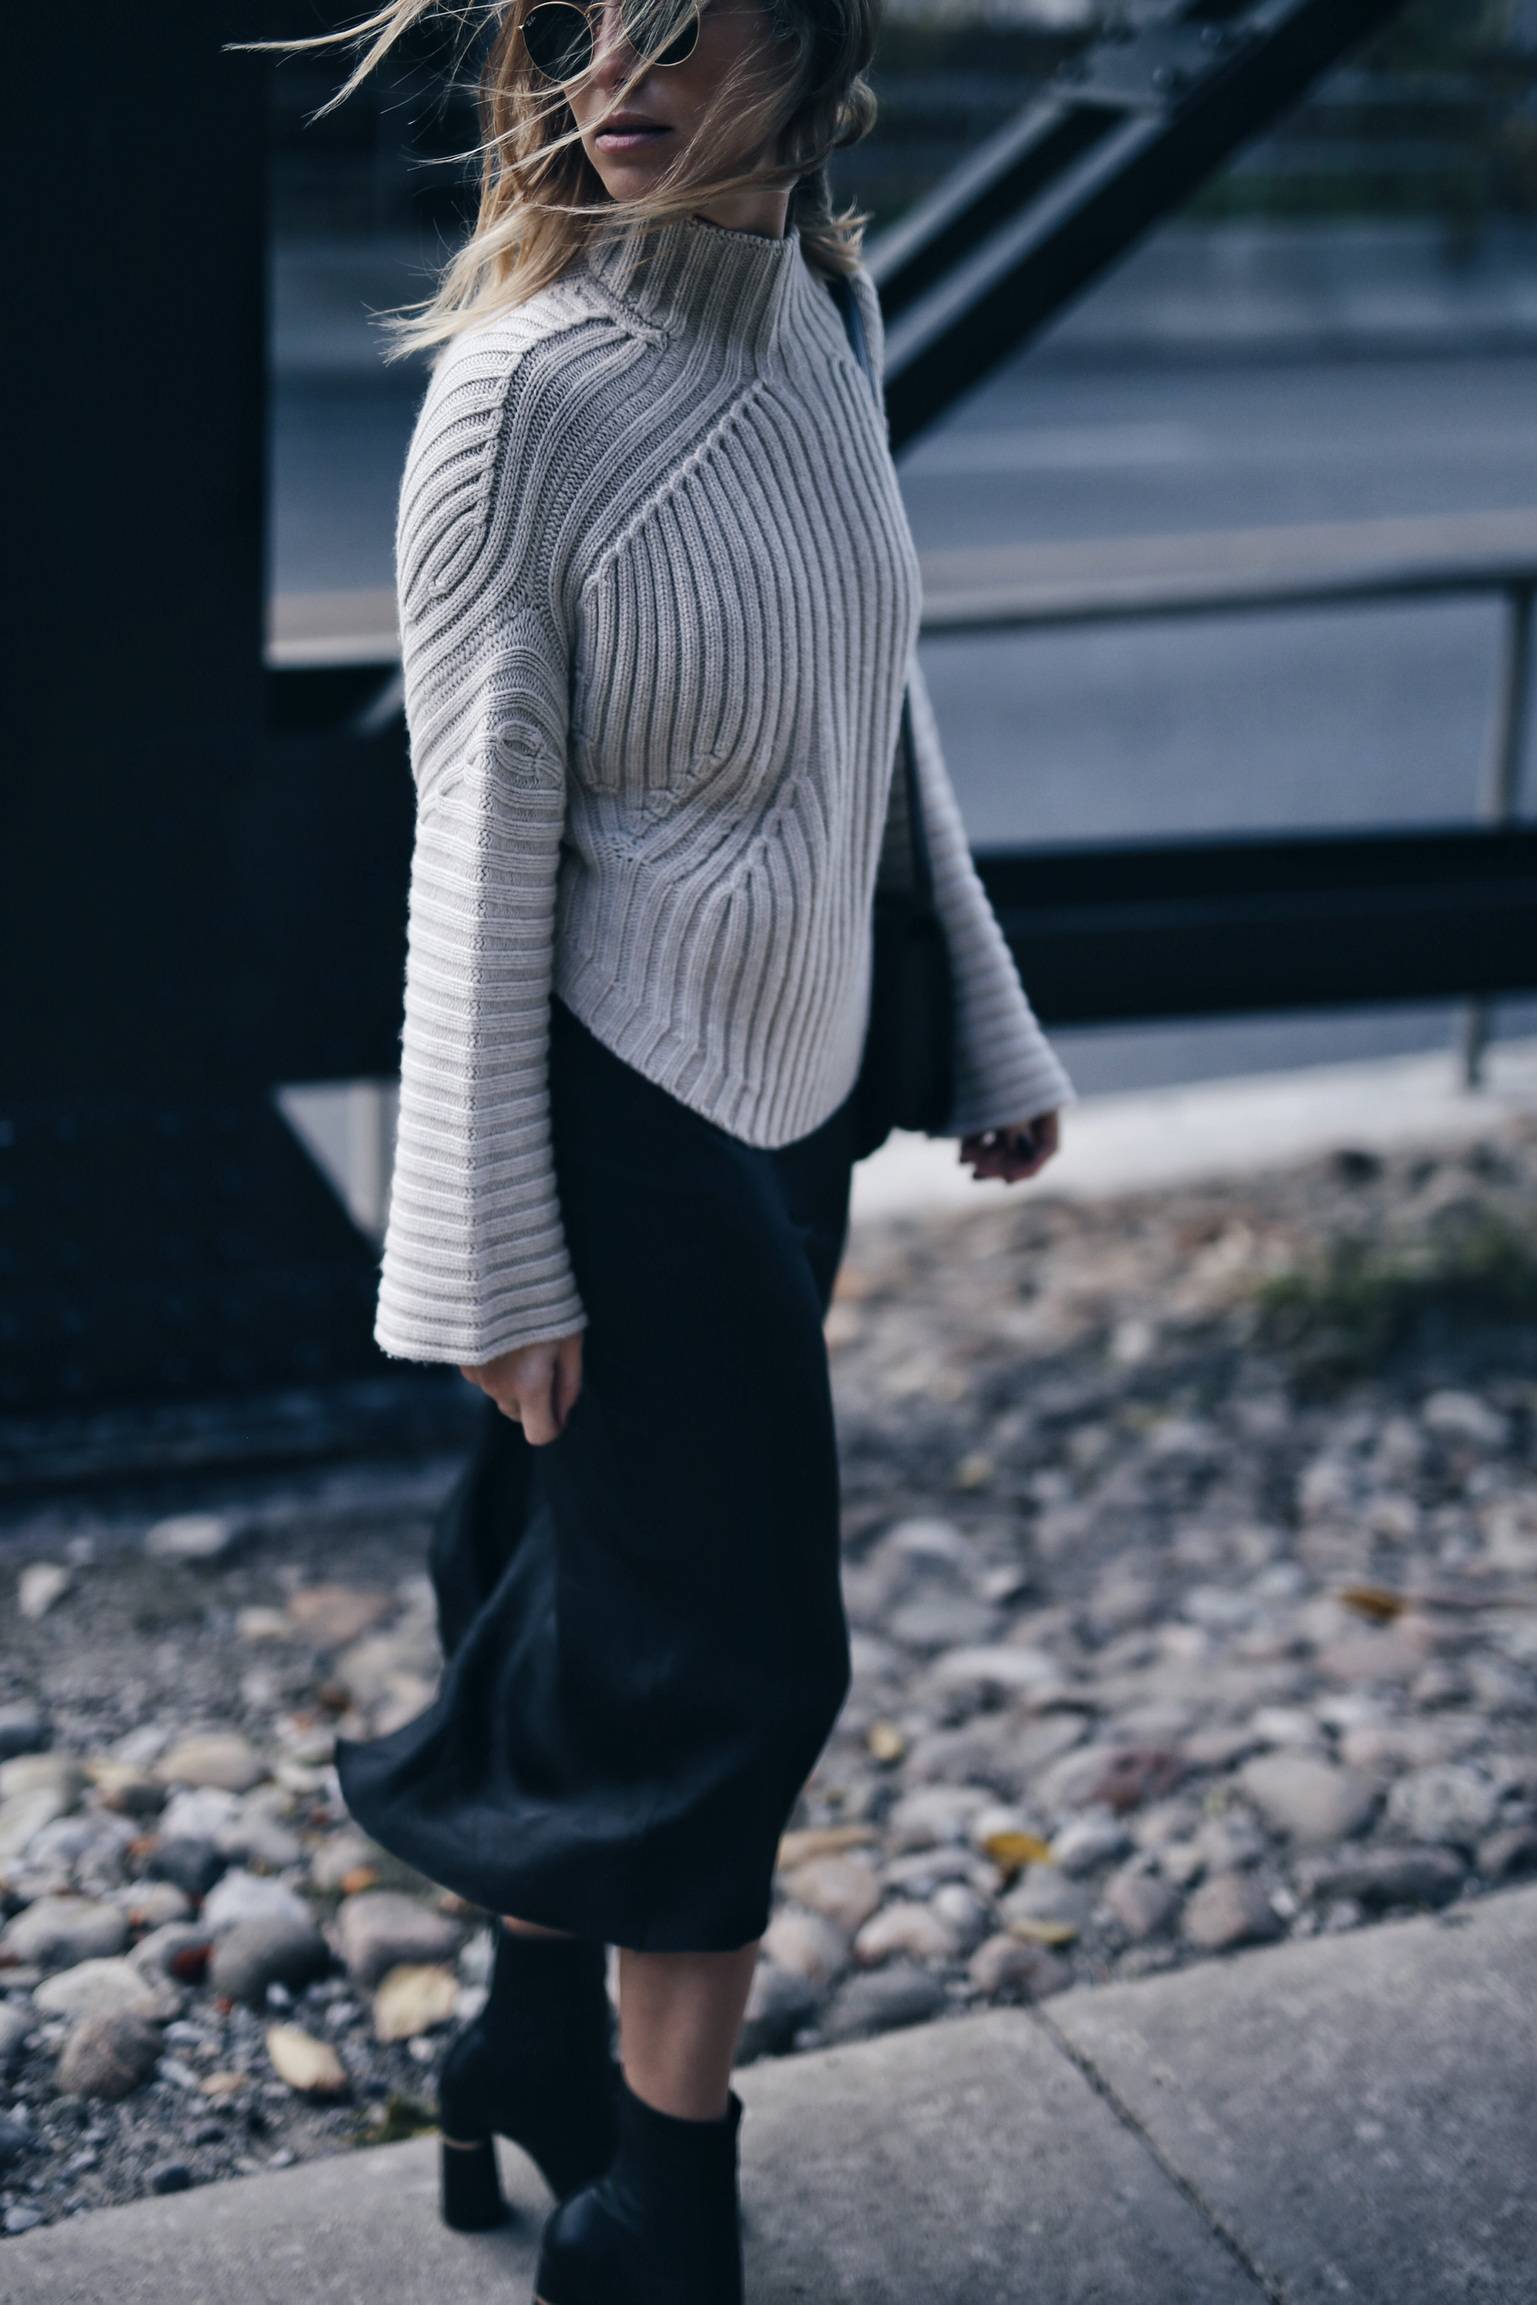 favourite-new-outfit-chunky-knit-with-slip-dress